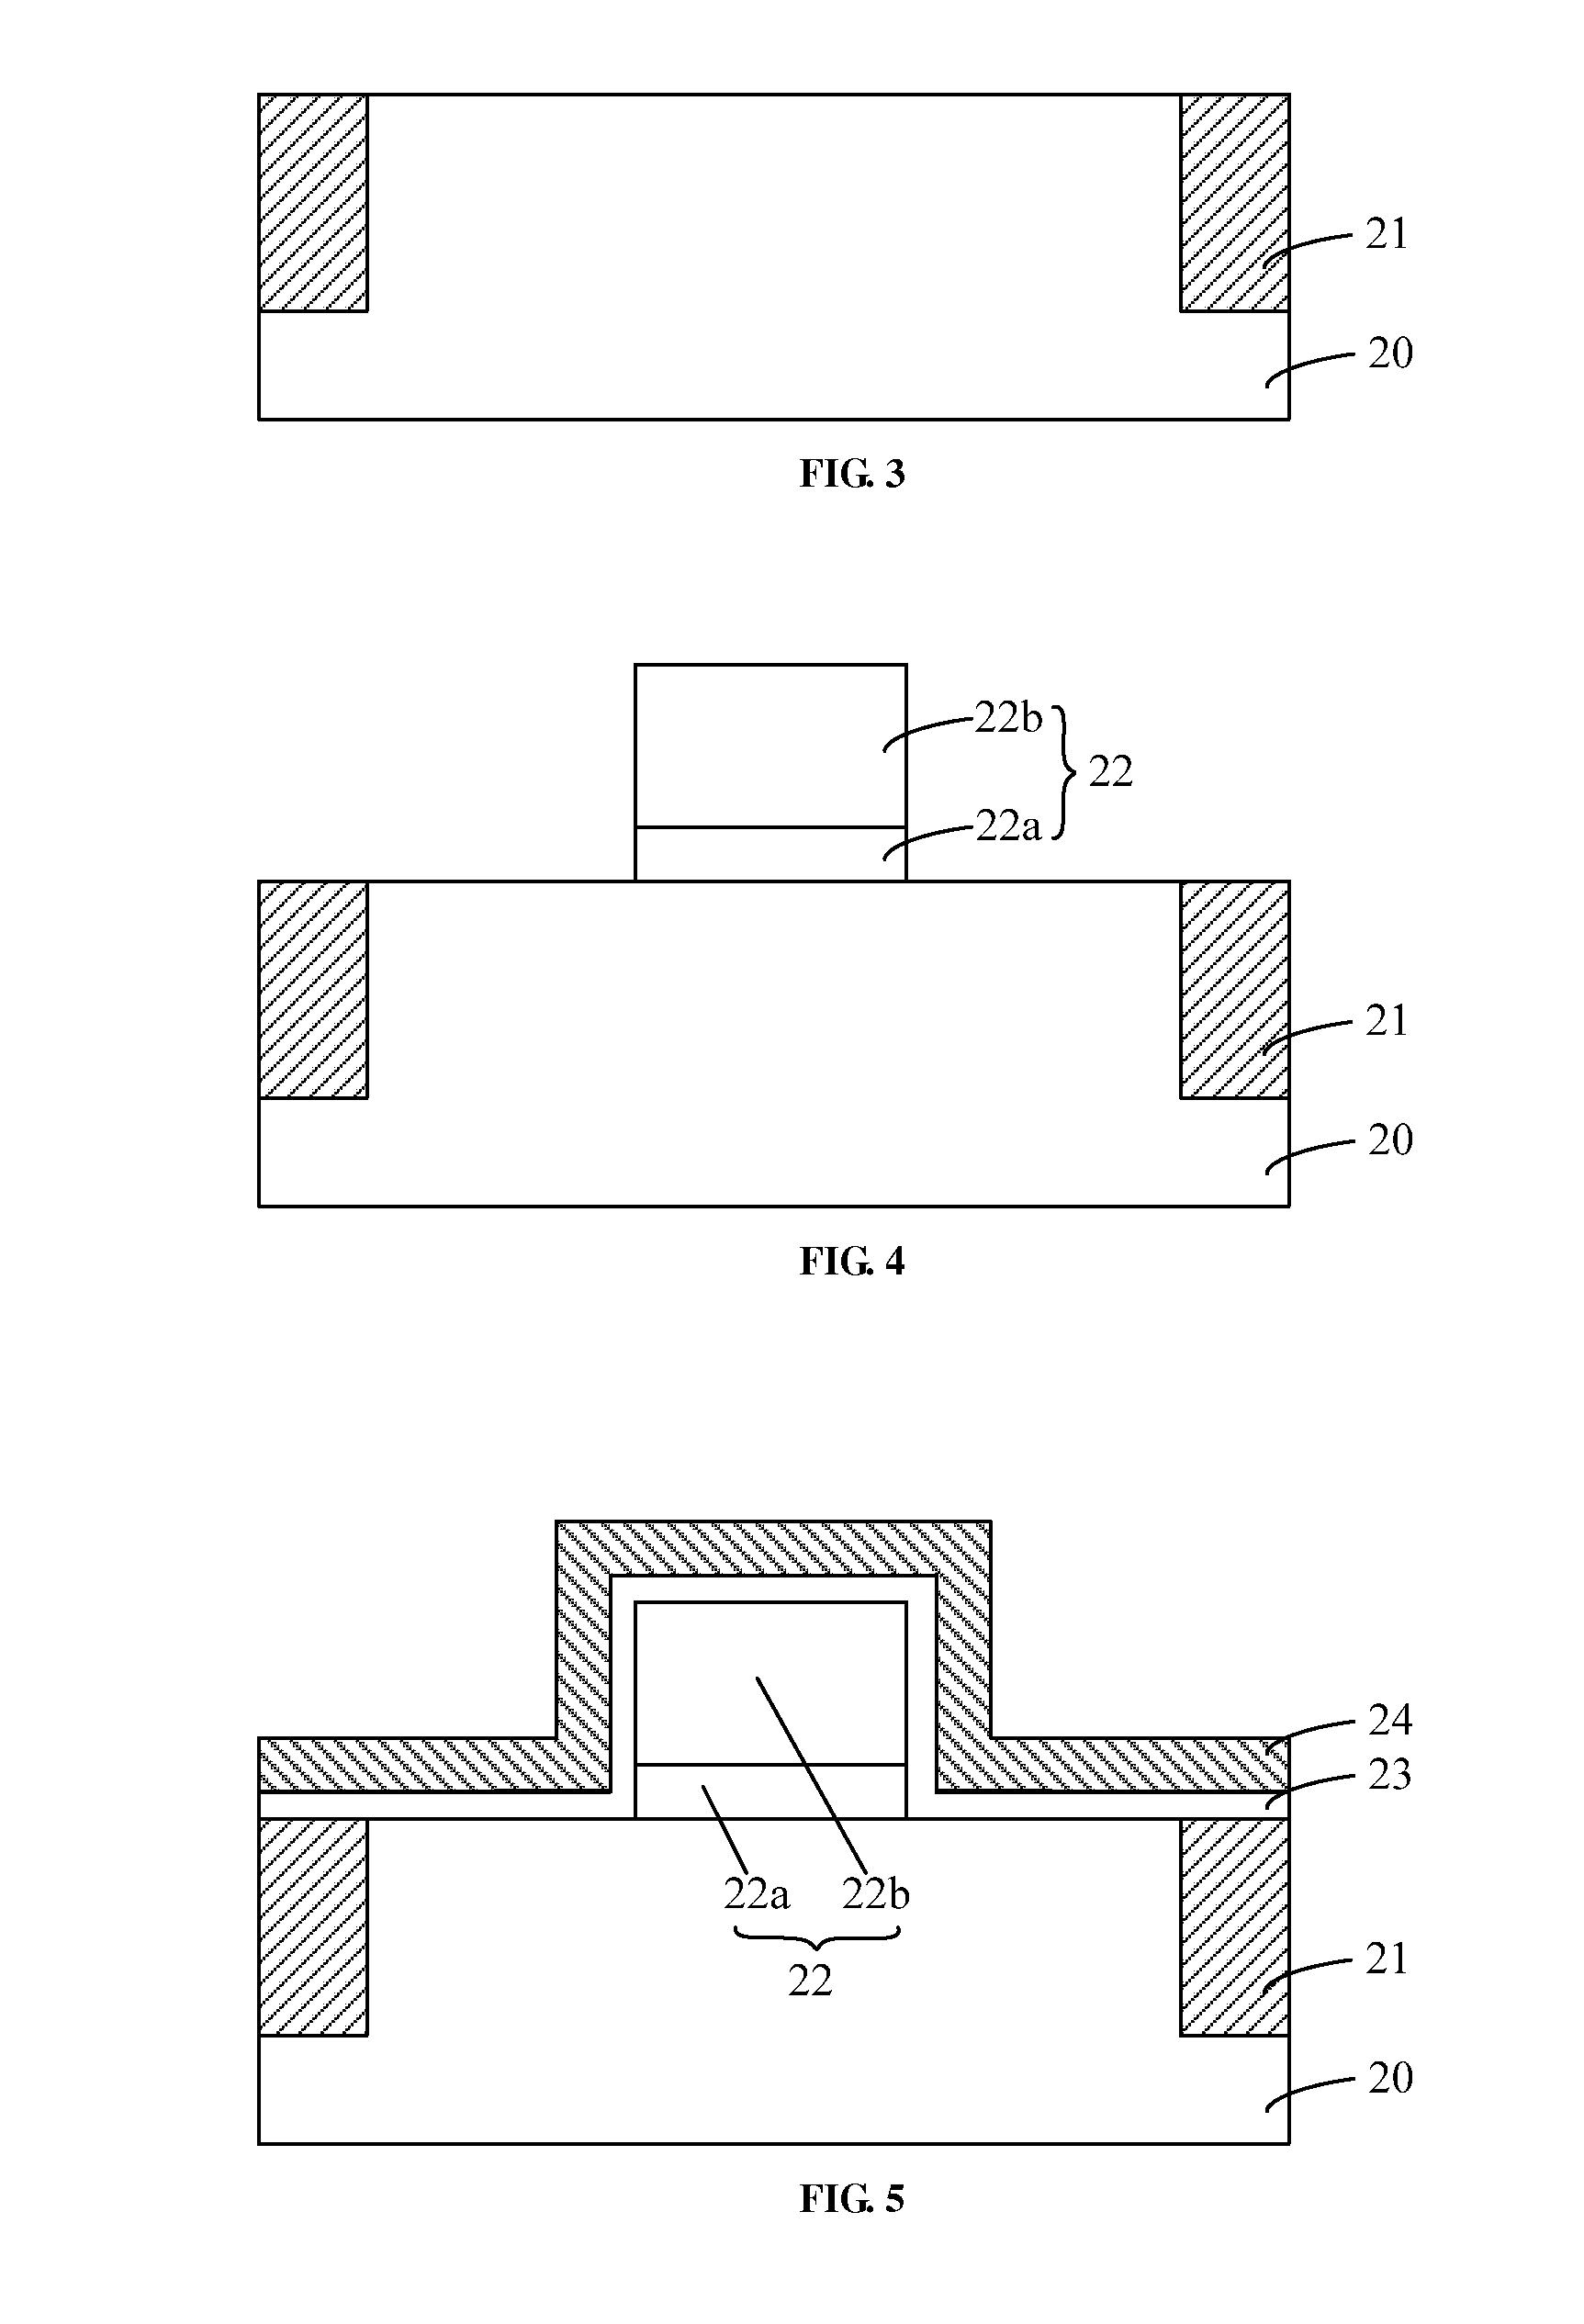 Mos transistor and method for forming the same